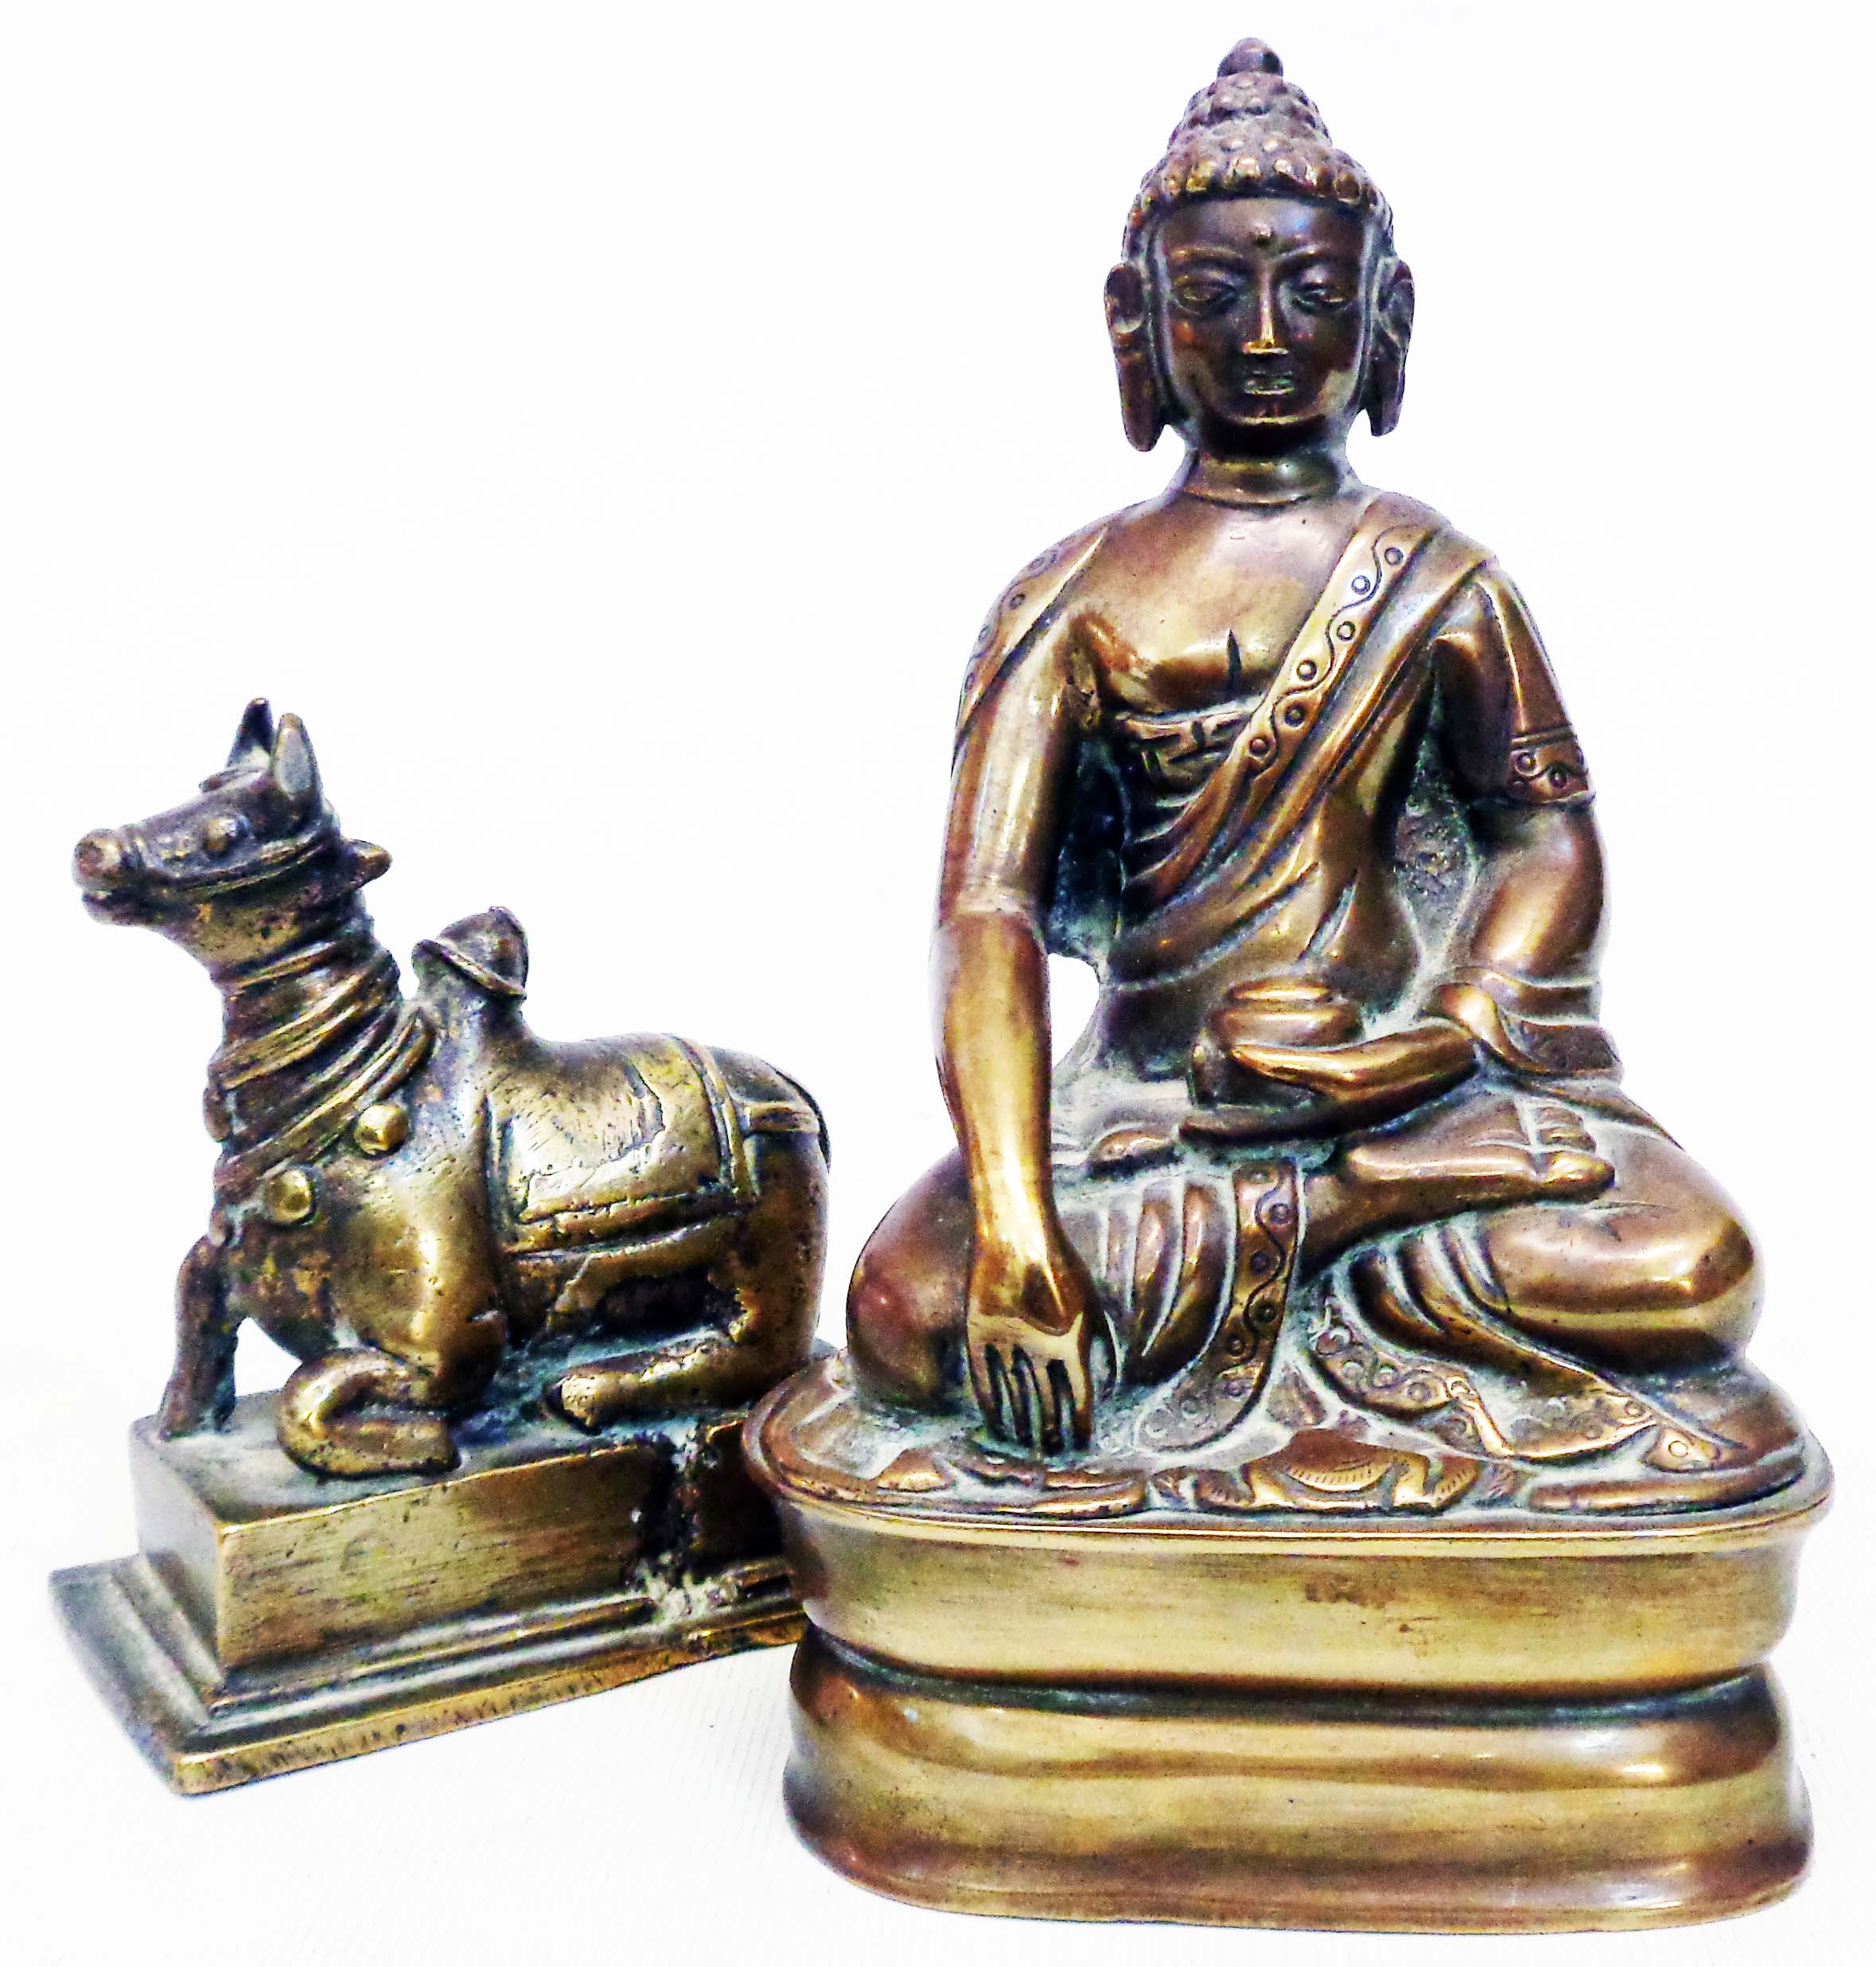 A brass Buddha in lotus position - sold with a solid brass bull set on plinth base